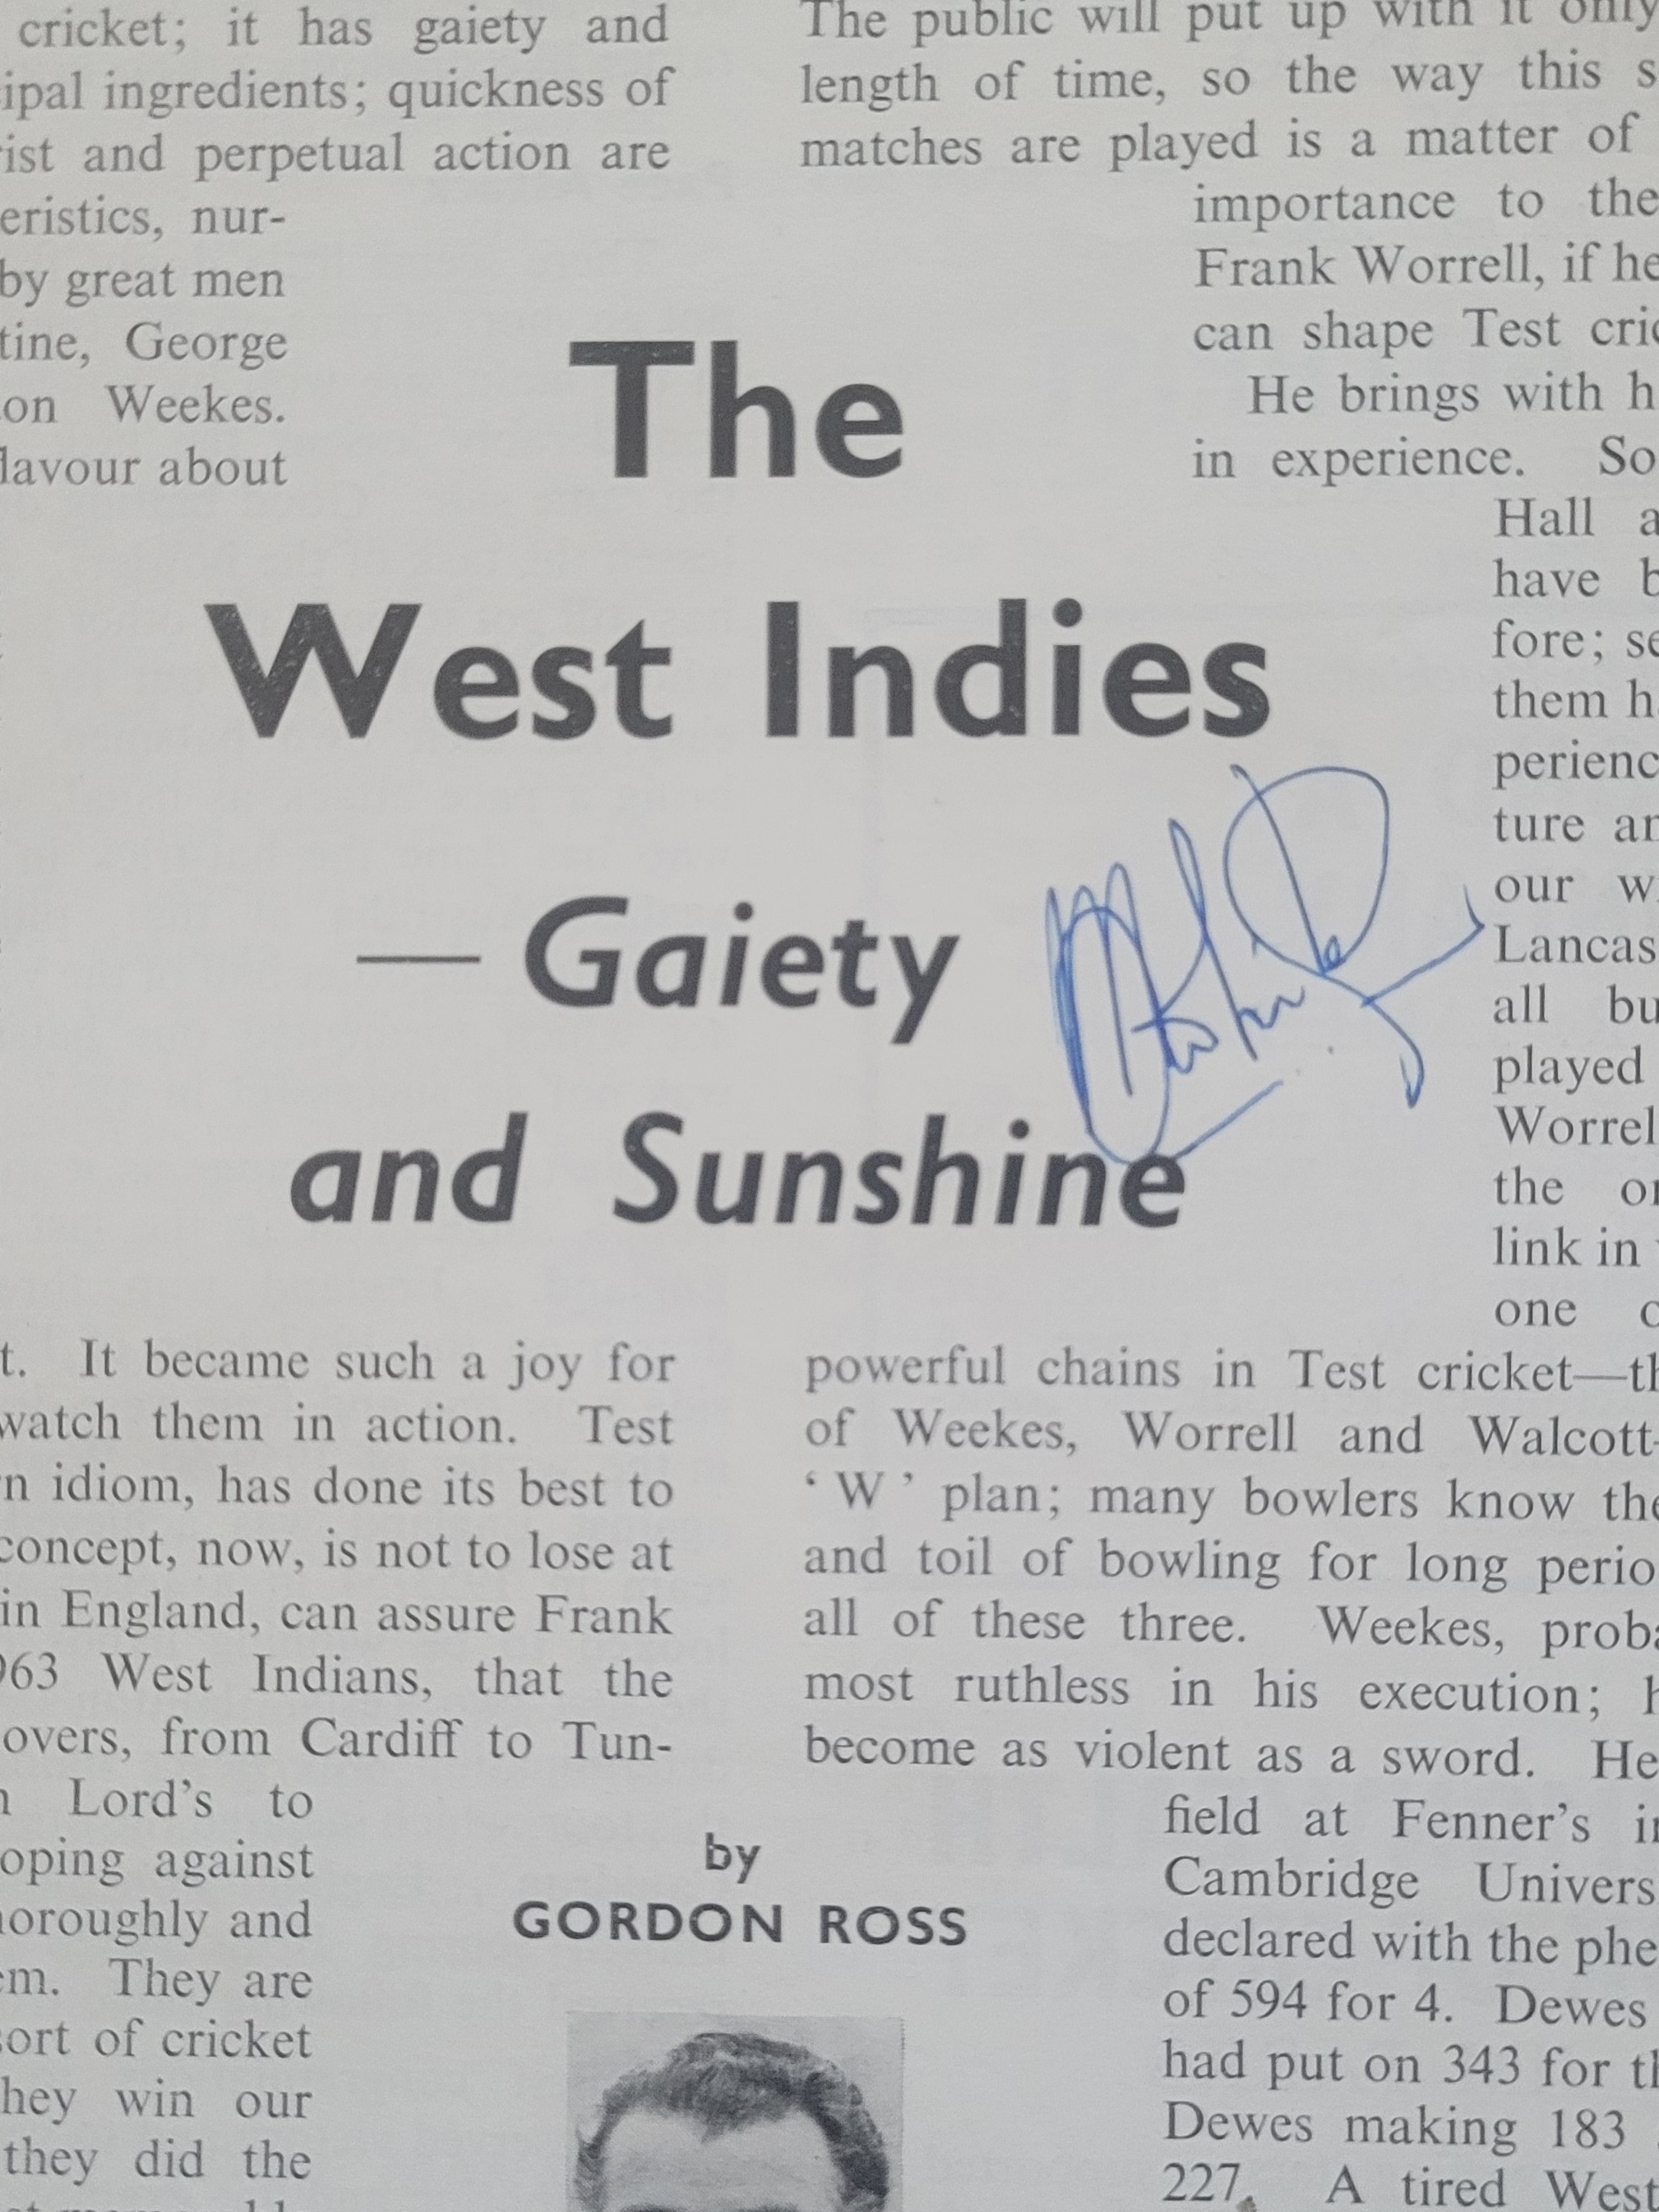 1963 WEST INDIES CRICKET TOUR TO ENGLAND AUTOGRAPHED BROCHURE - Image 2 of 10